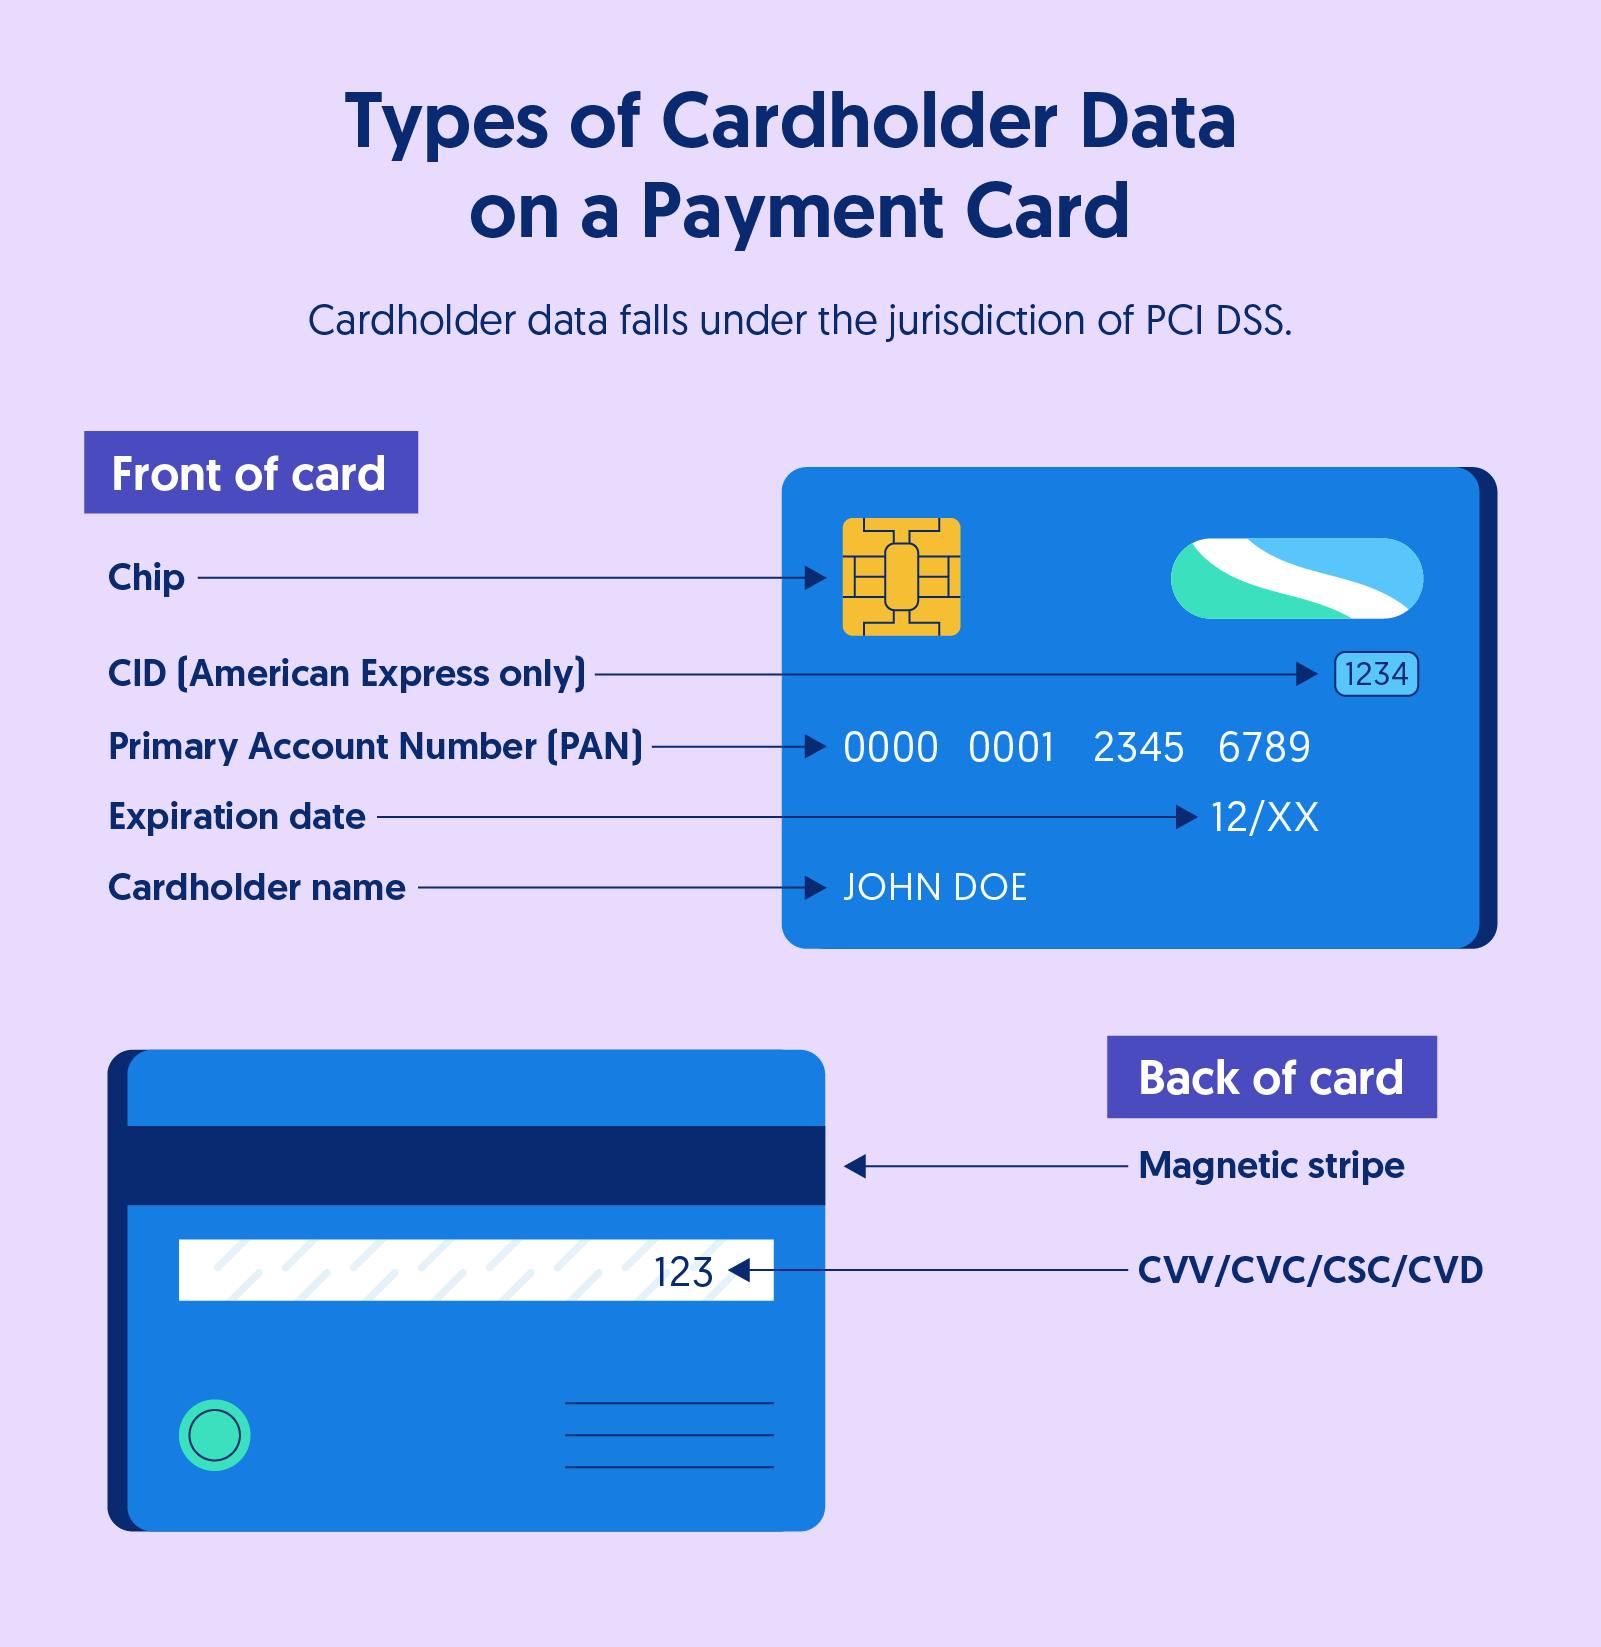 illustration of the front and back of a payment card to show the different types of cardholder data